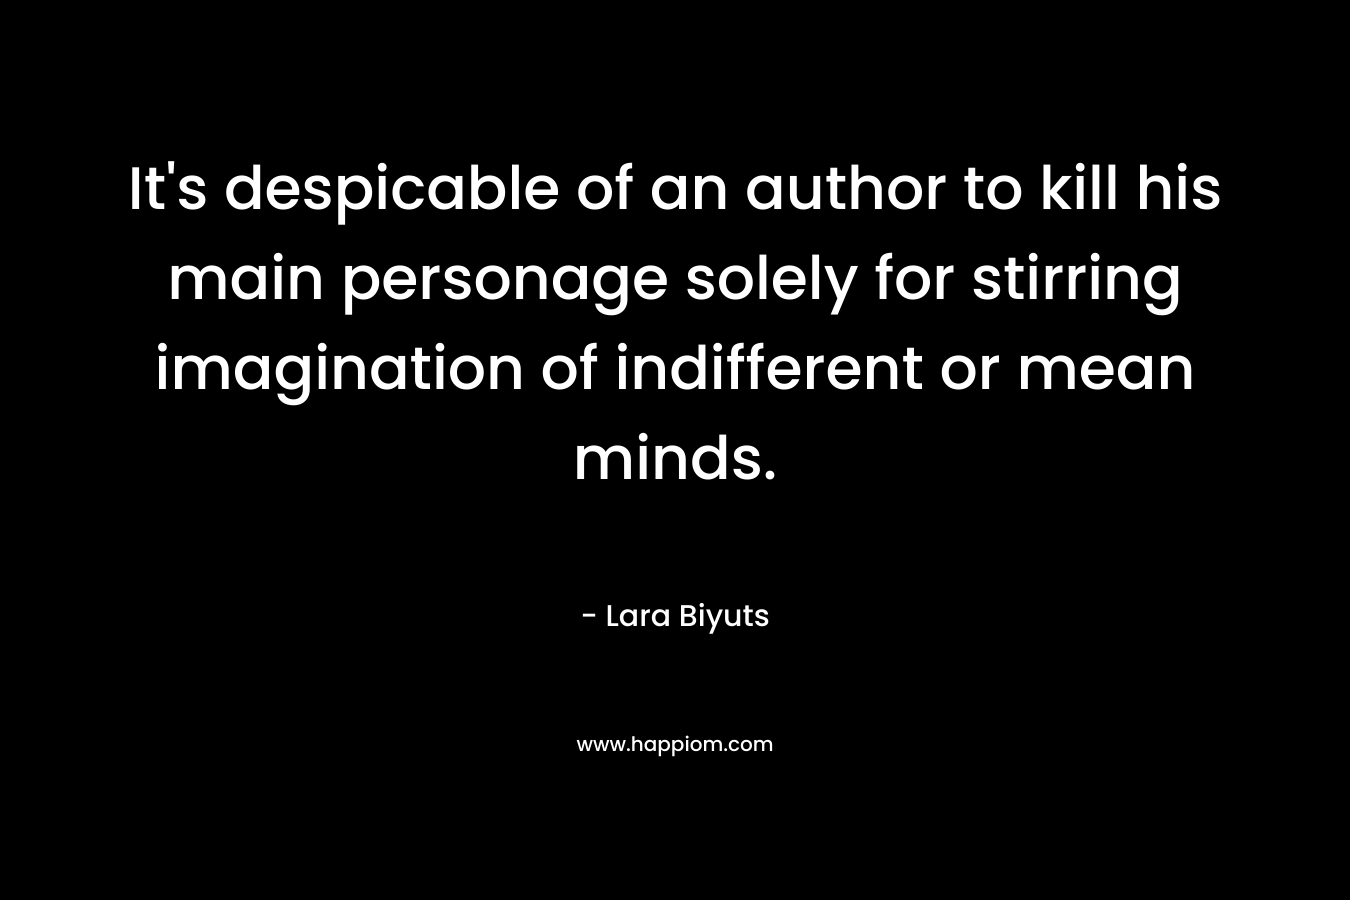 It’s despicable of an author to kill his main personage solely for stirring imagination of indifferent or mean minds. – Lara Biyuts